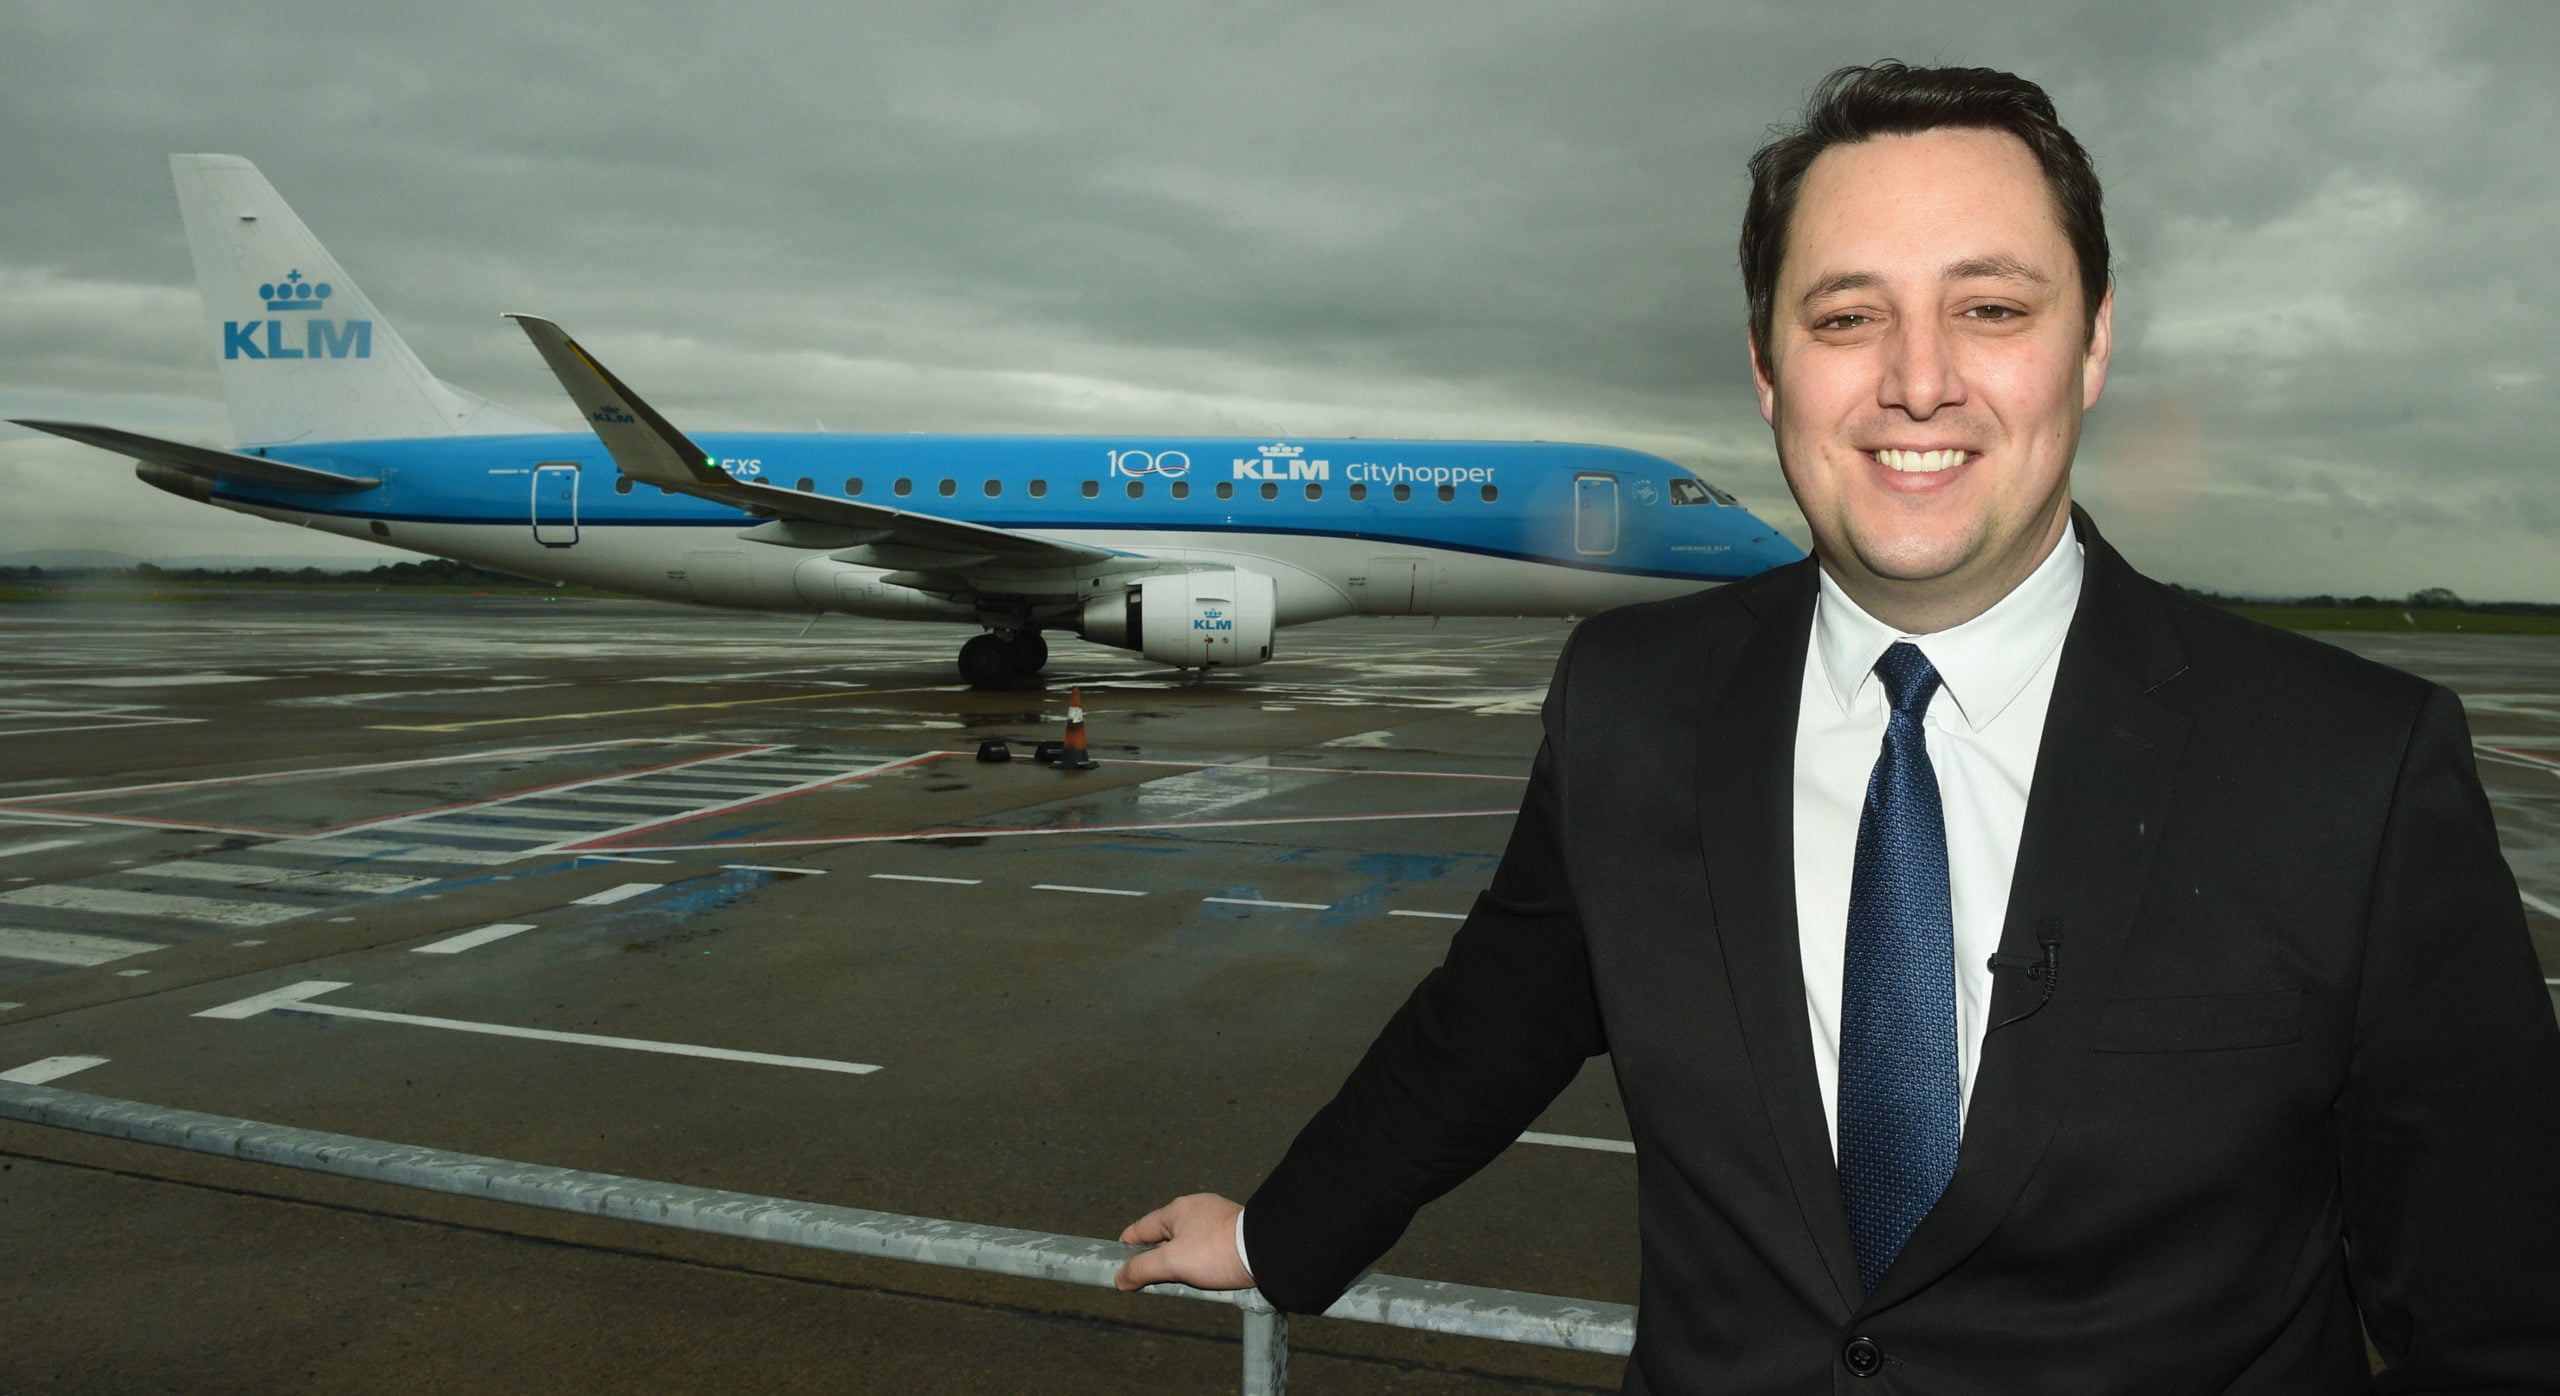 Mayor Houchen with a KLM plane